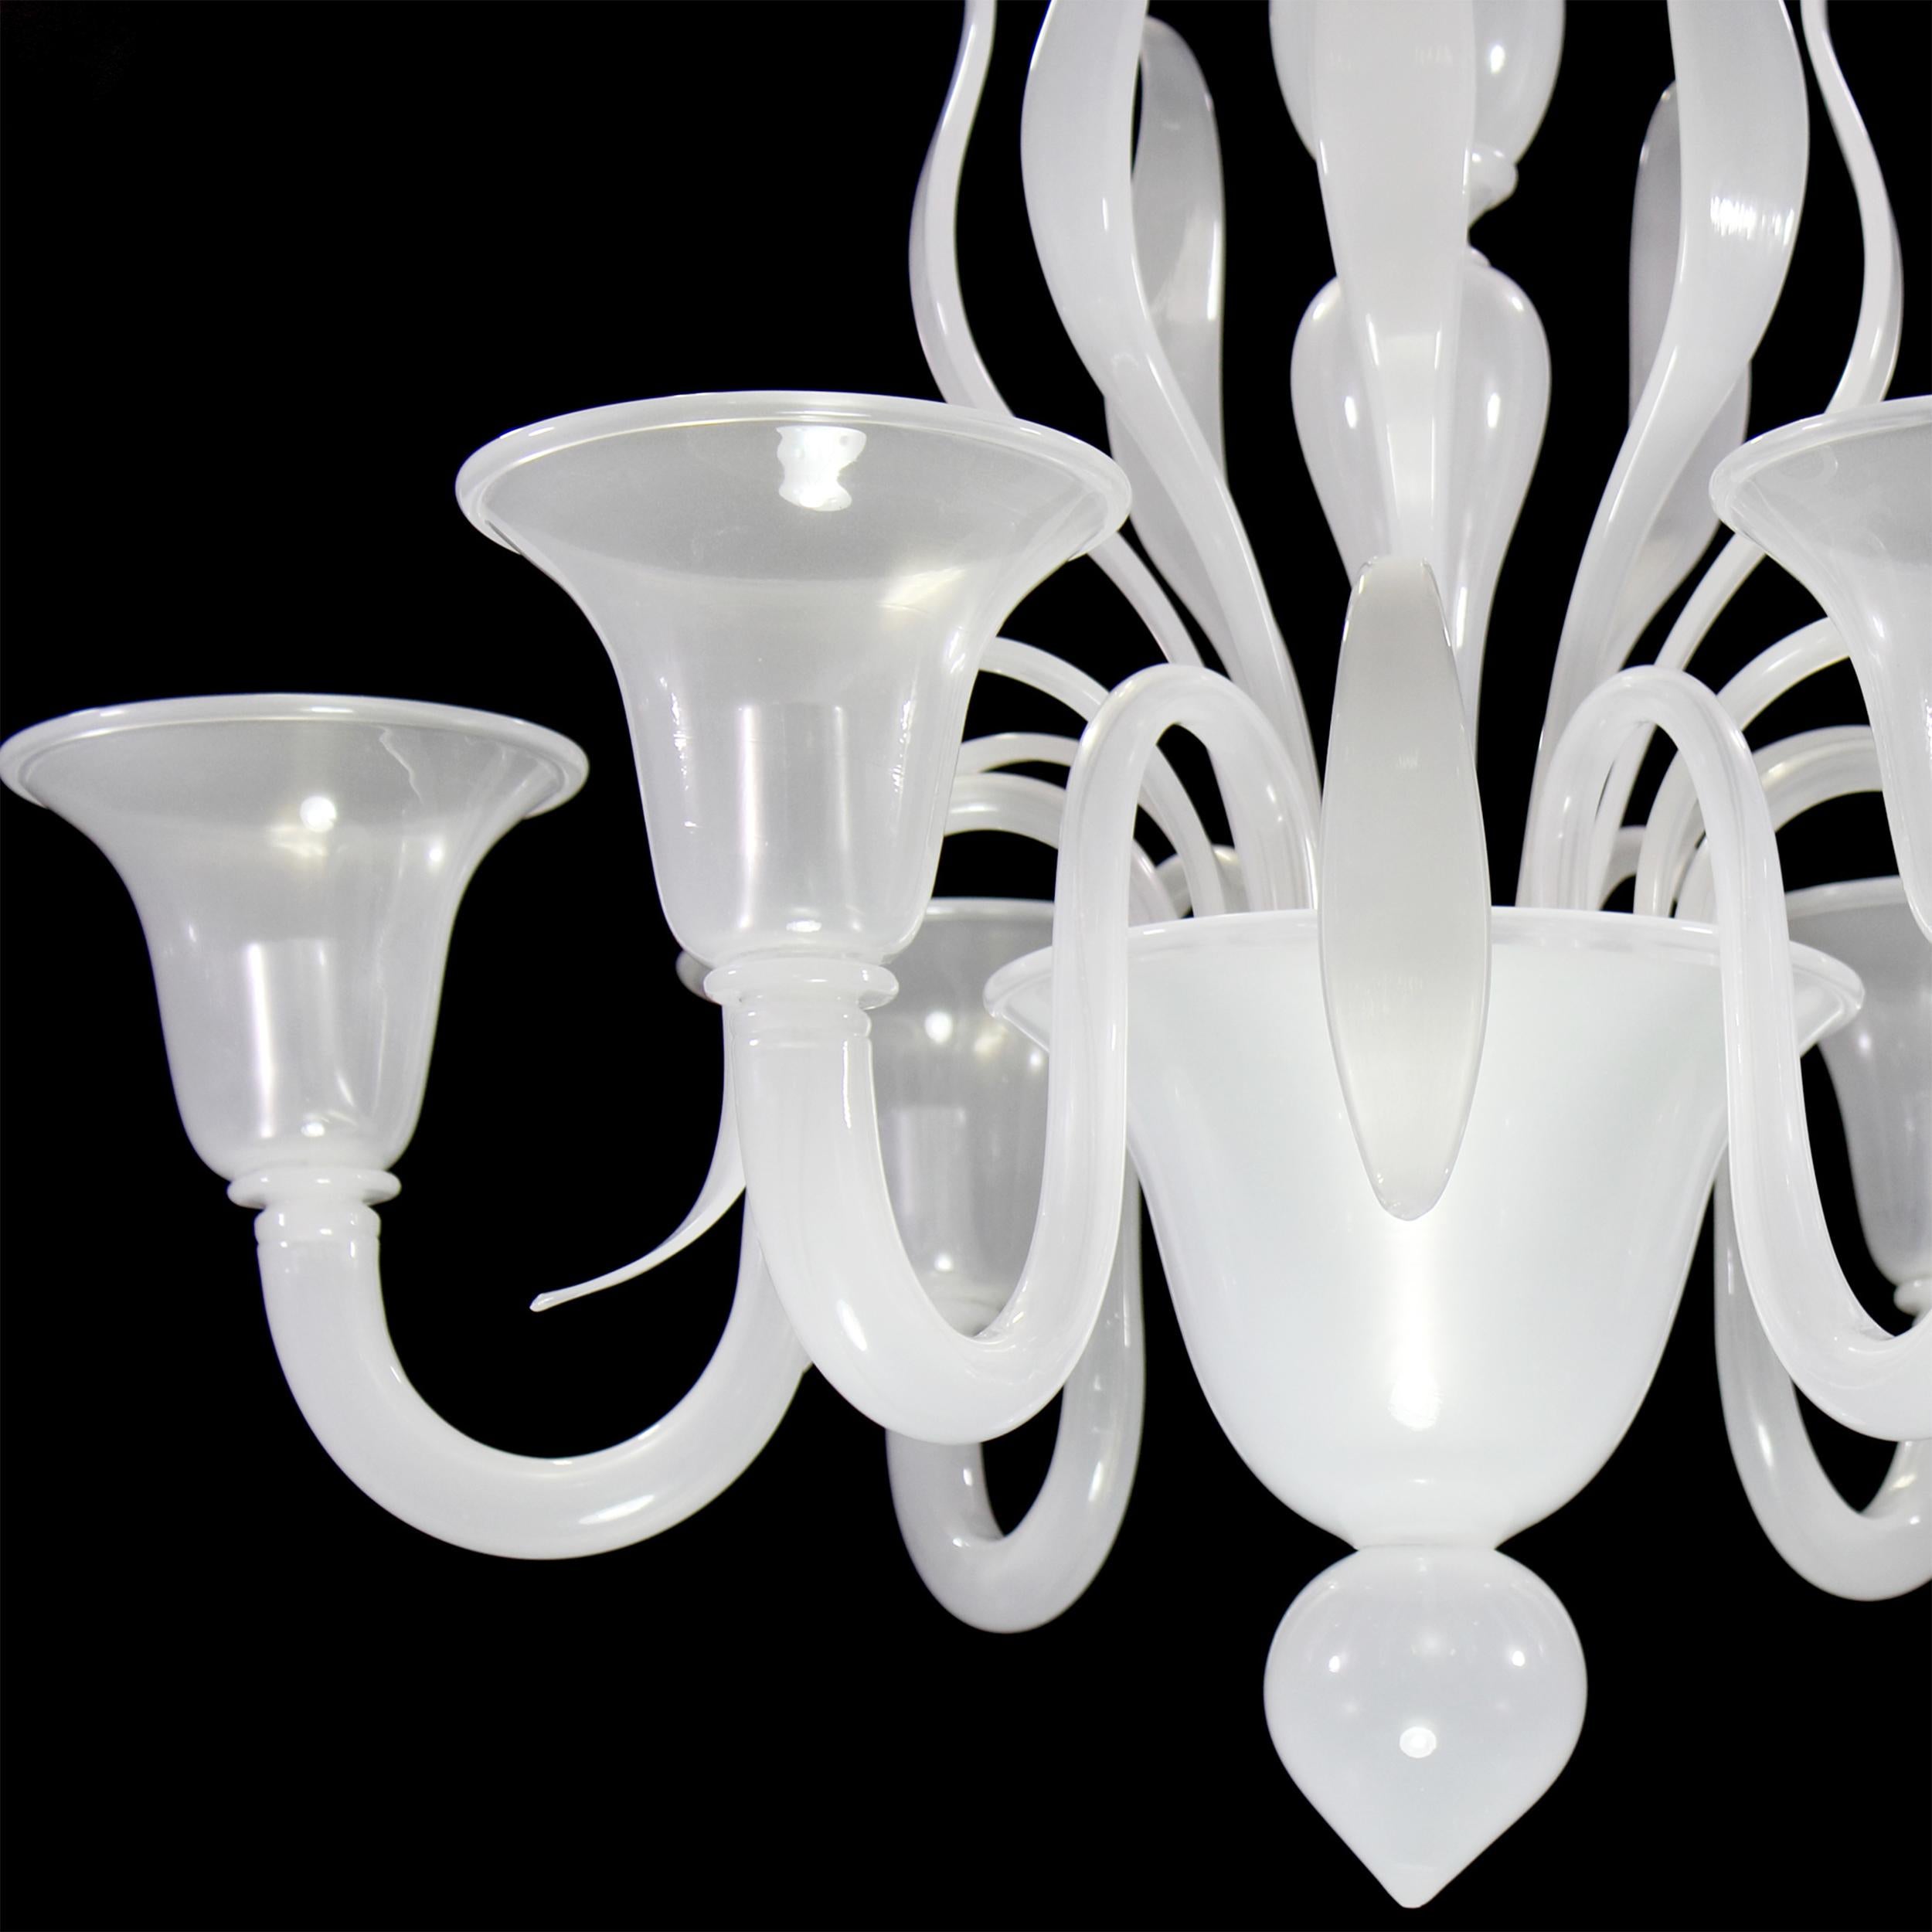 Swing 275 chandelier, 6 upwards lights, silk Murano glass by Multiforme. 
The collection of Murano glass chandeliers Swing 275 is one of our collections that most differs from the Classic Murano tradition: the design of this collection is closer to